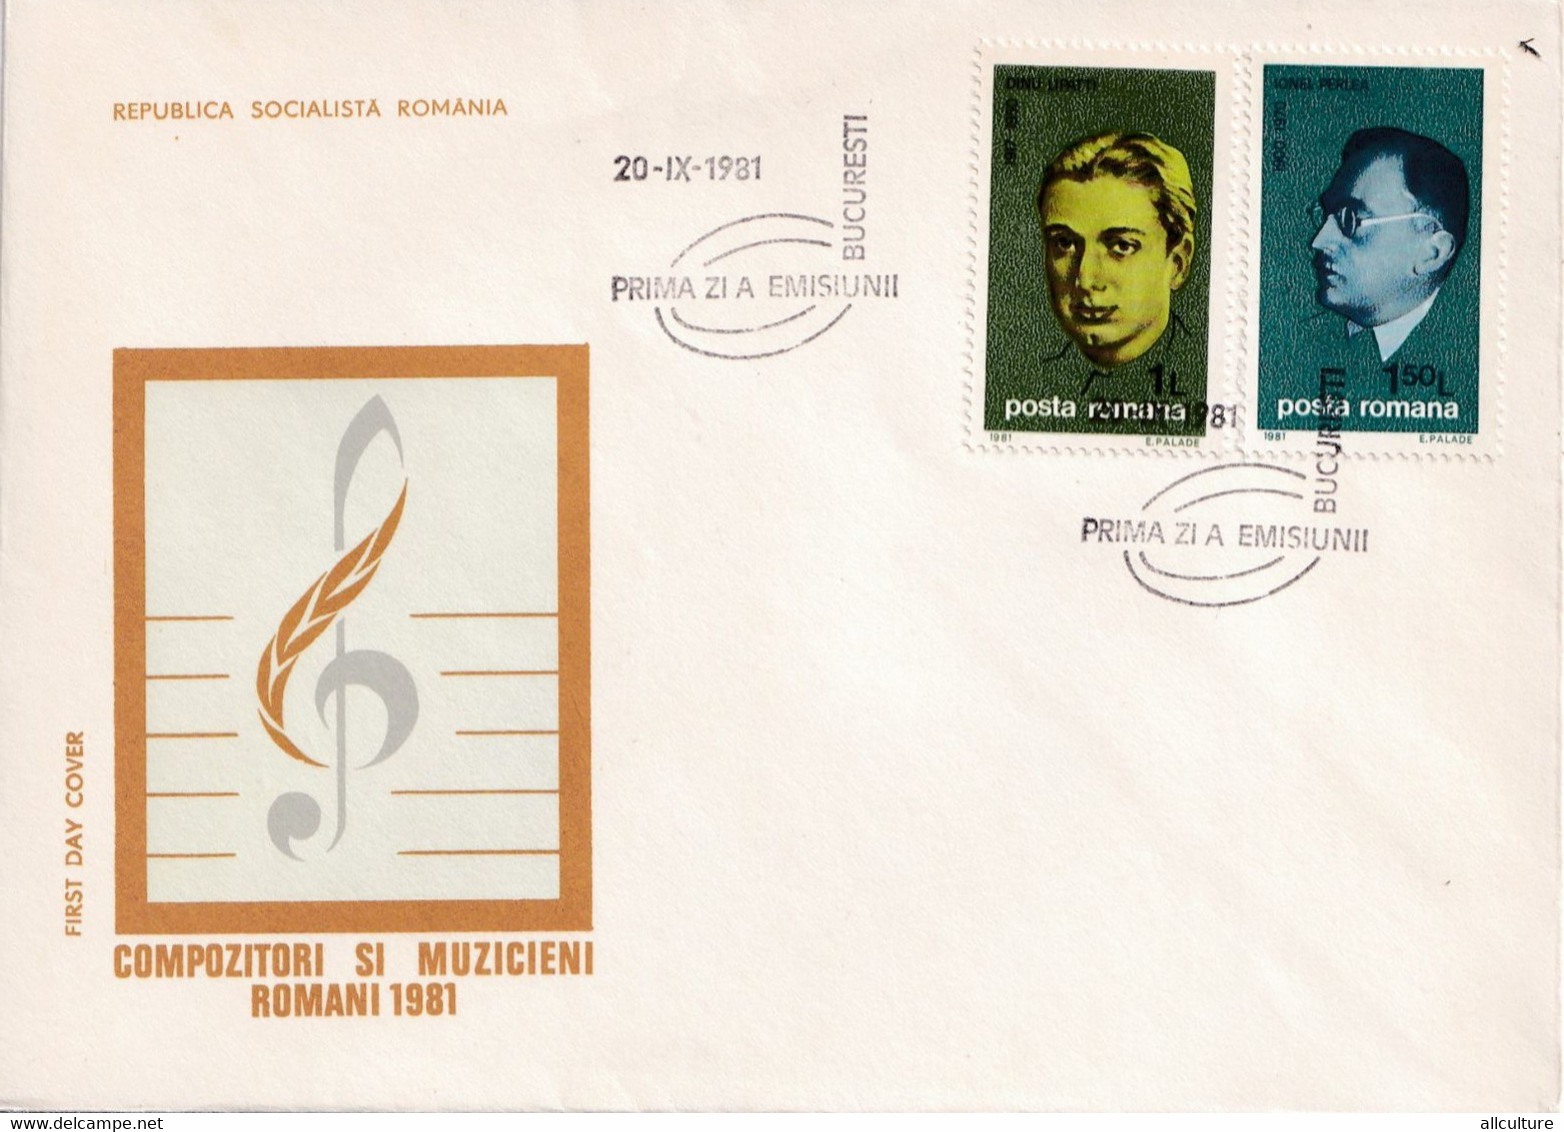 A2876 - Romanian Musicians And Composers, Bucuresti  1981, Socialist Republic Of Romania 3 Covers  FDC - Singers